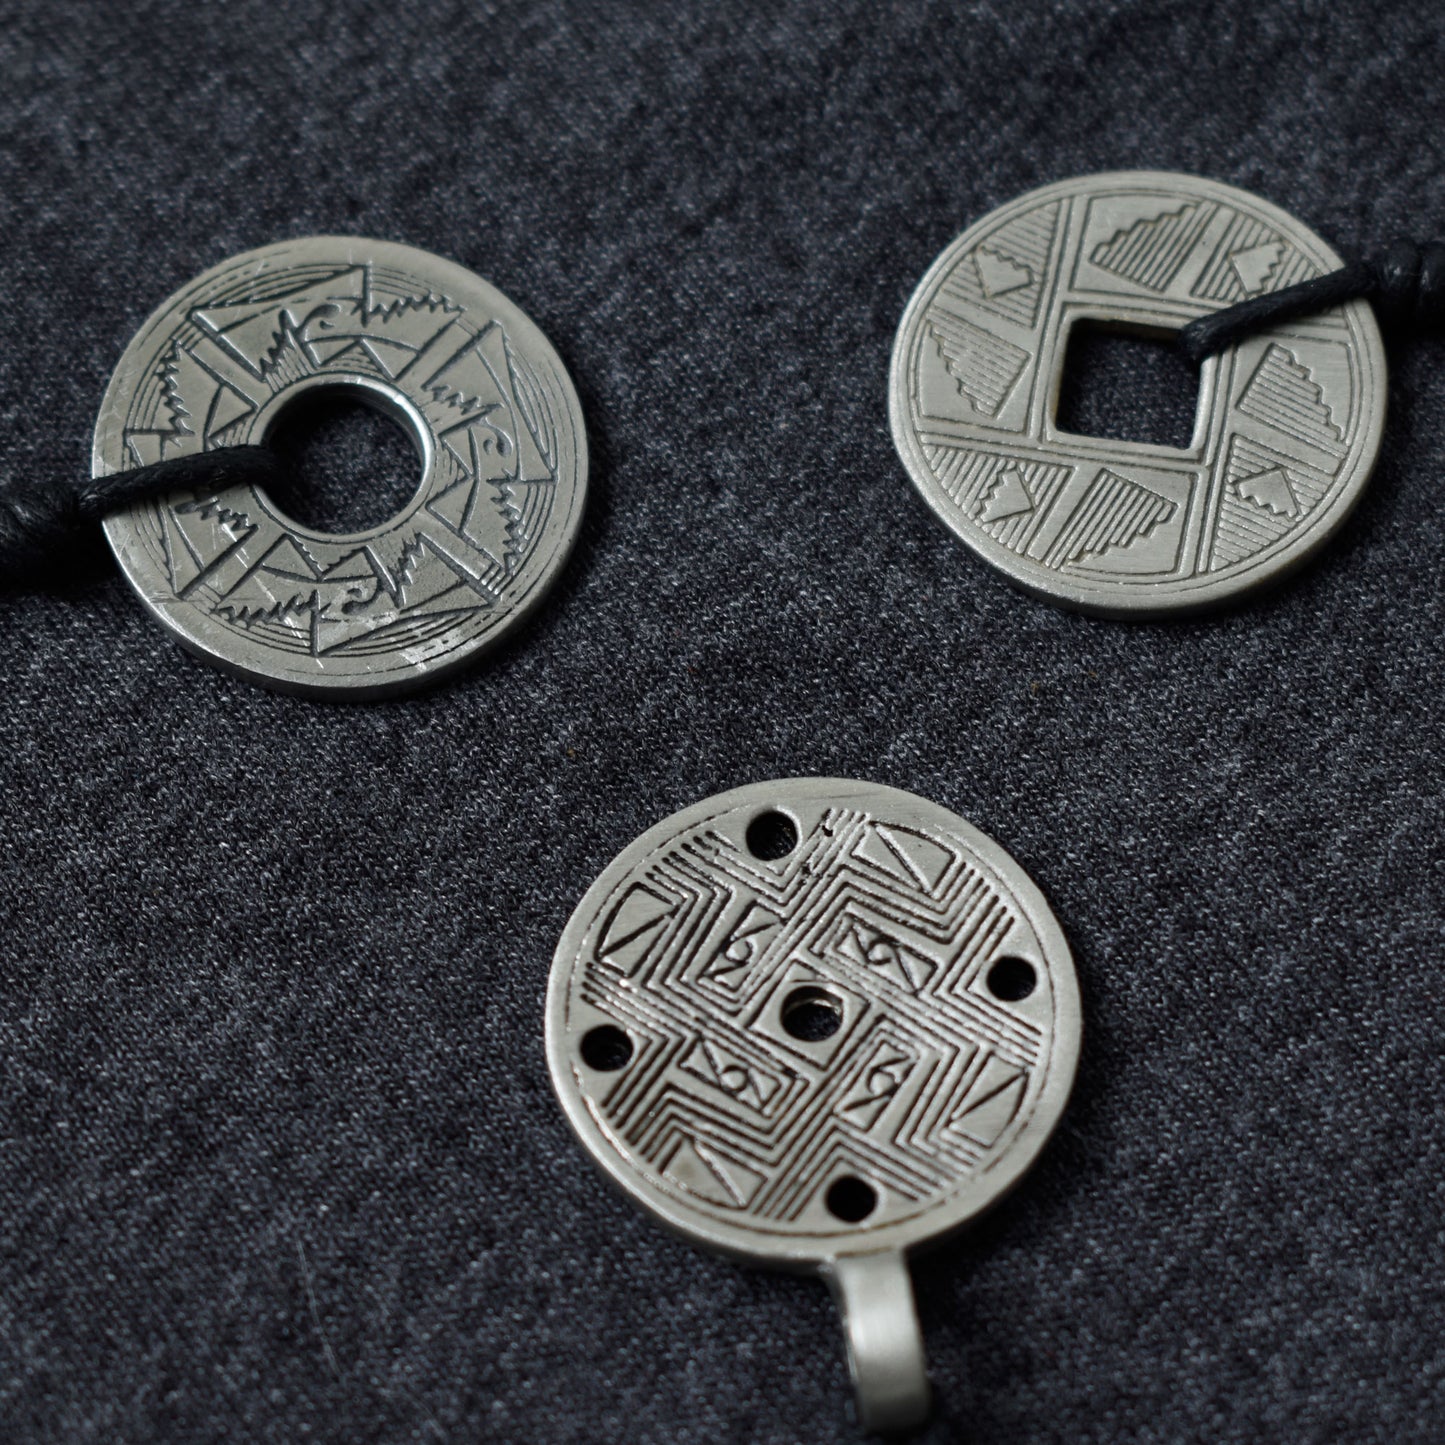 Chinese I Ching Coin Silver Pewter Charm Necklace Pendant Jewelry